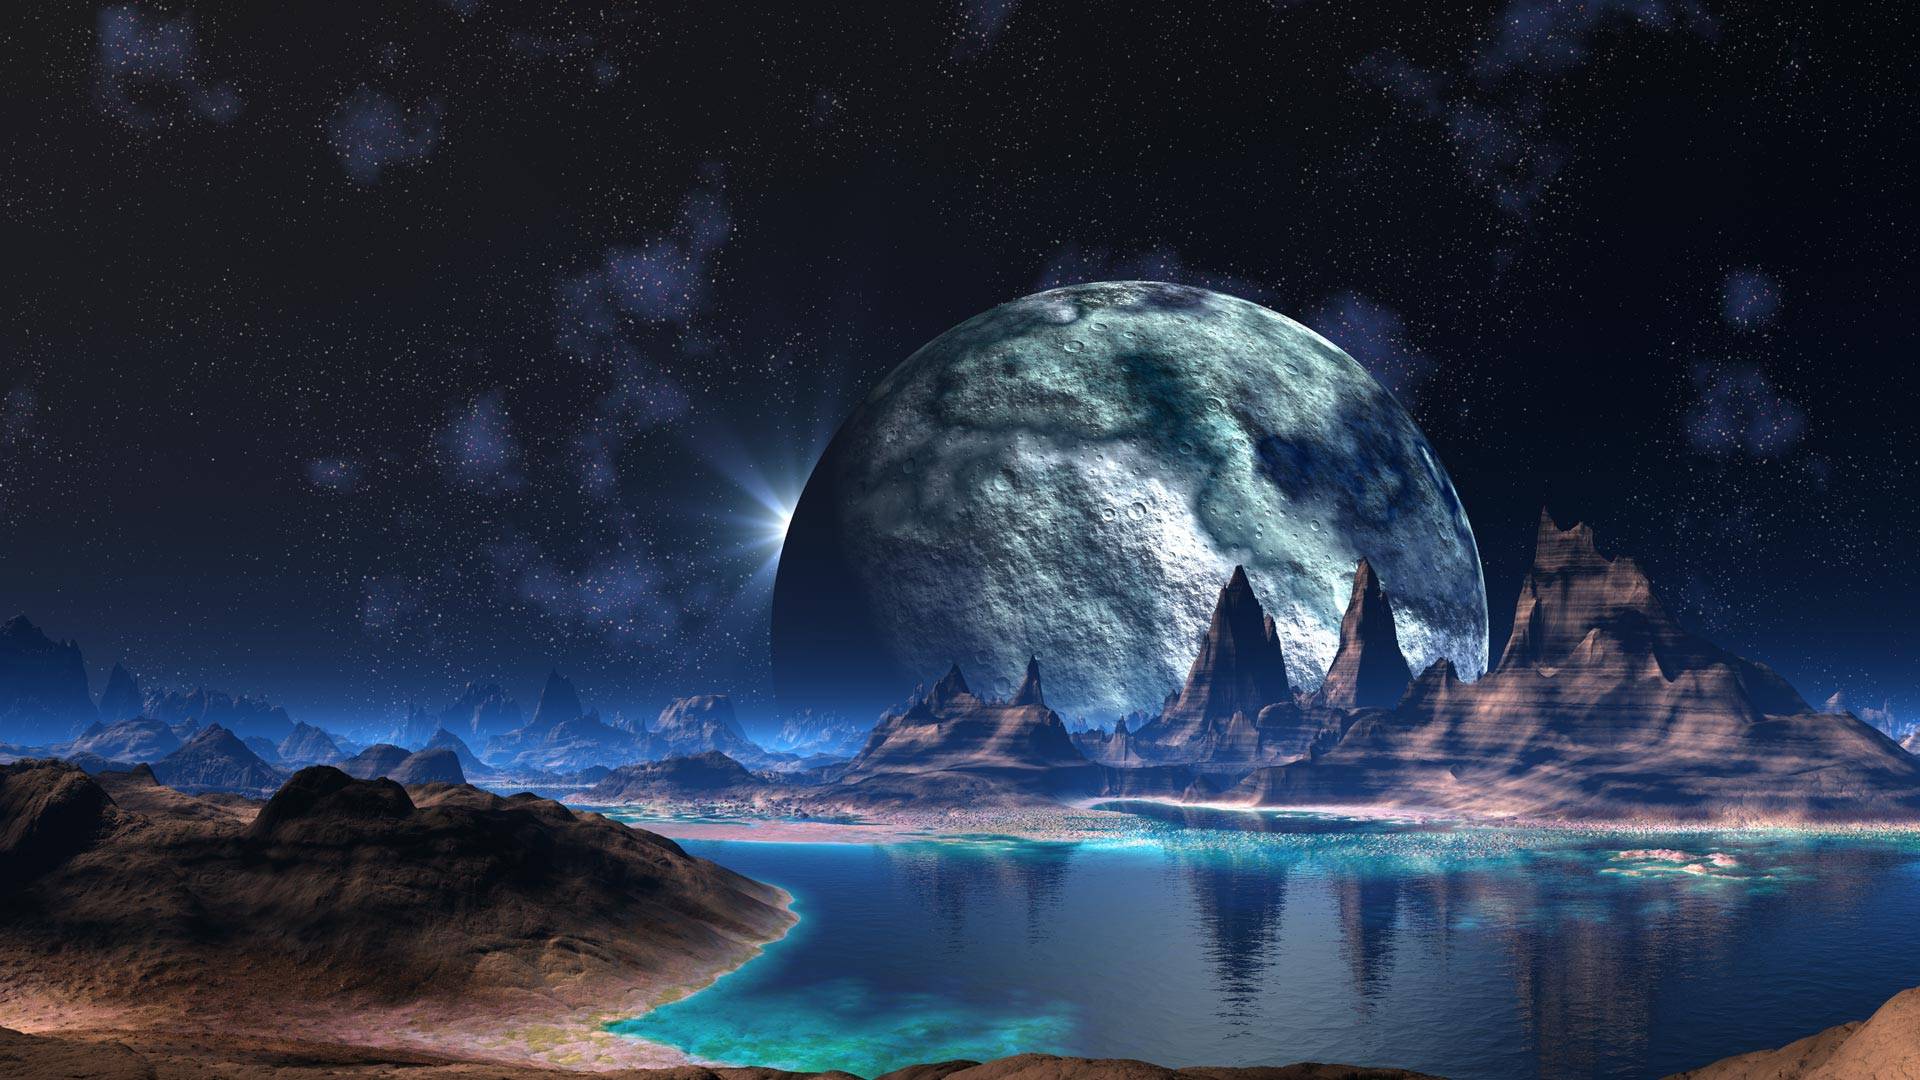 Wallpaper Sci Fi Planets Giant Space Scifi 1920x1080PX